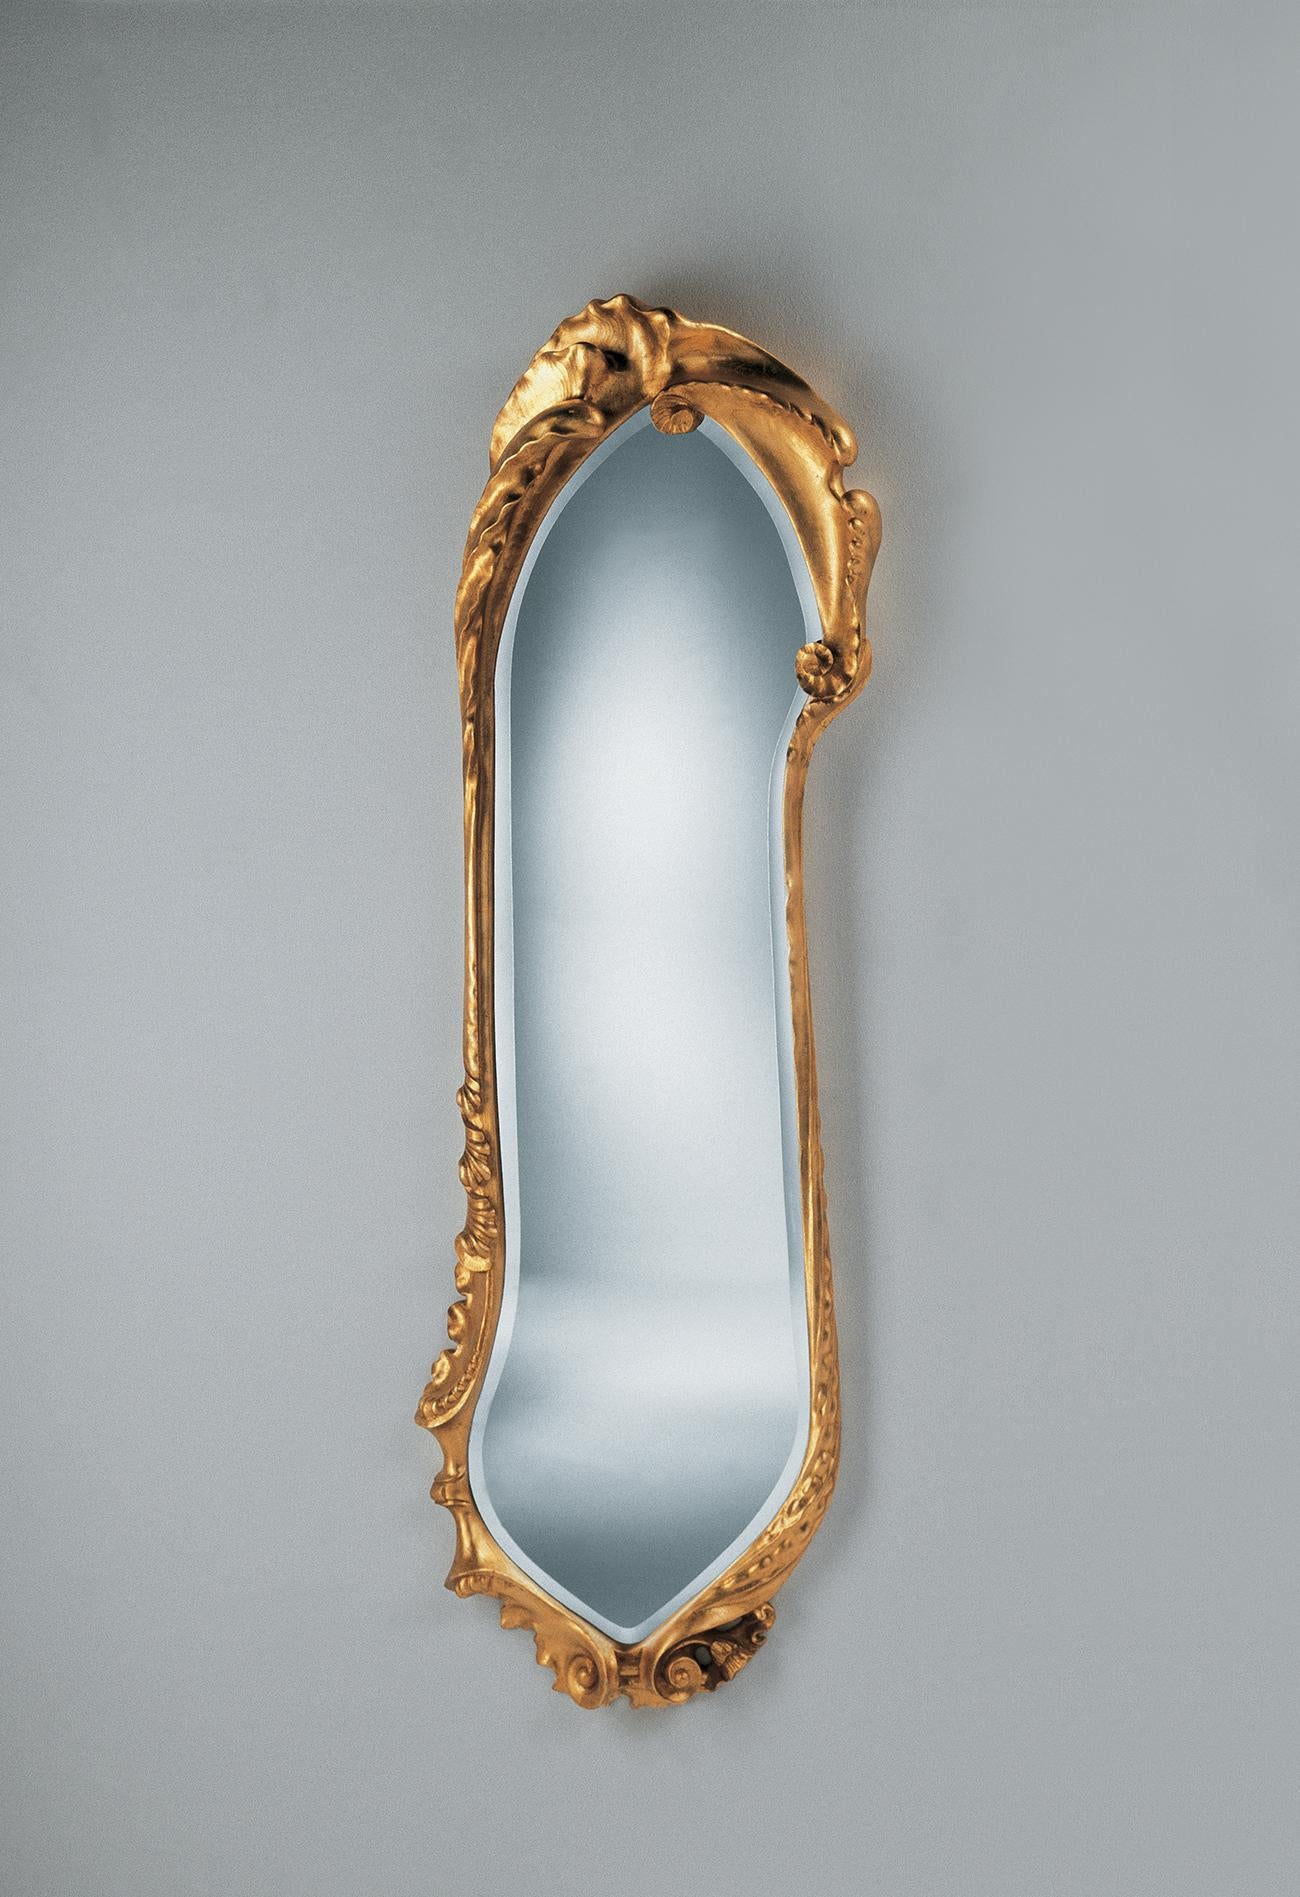 Calvet golden mirror, Antonio Gaudí
1902
Dimensions: 58 cm x H 195 cm
Materials: Solid oak varnished or coated in fine golden brass sheets using a gold leaf technique


Antoni Gaudí (1852/1926) is, without doubt, the most internationally well-known